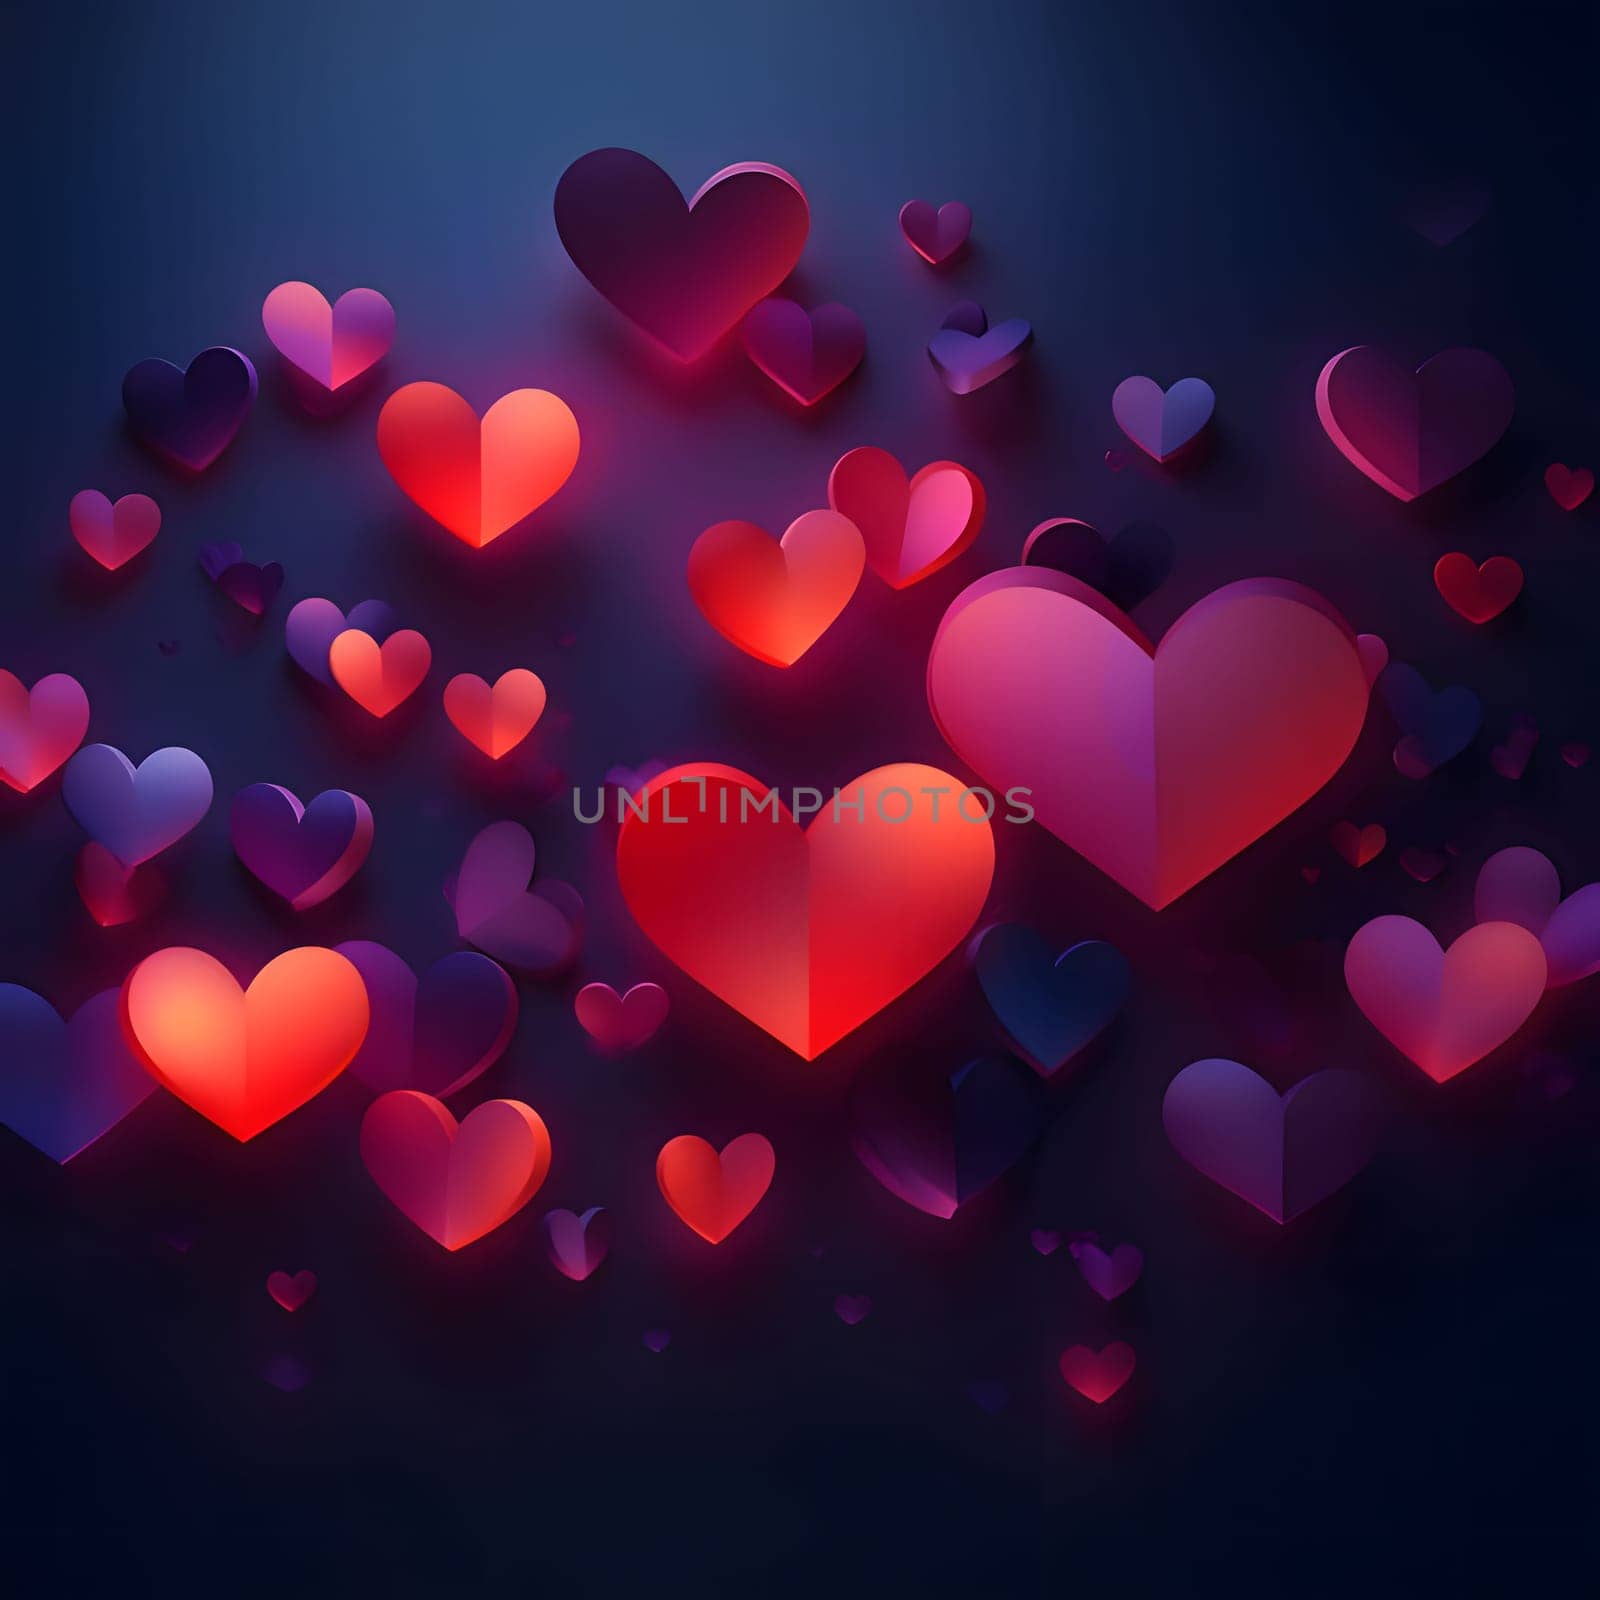 Red navy blue hearts on a dark background. Heart as a symbol of affection and love. The time of falling in love and love.